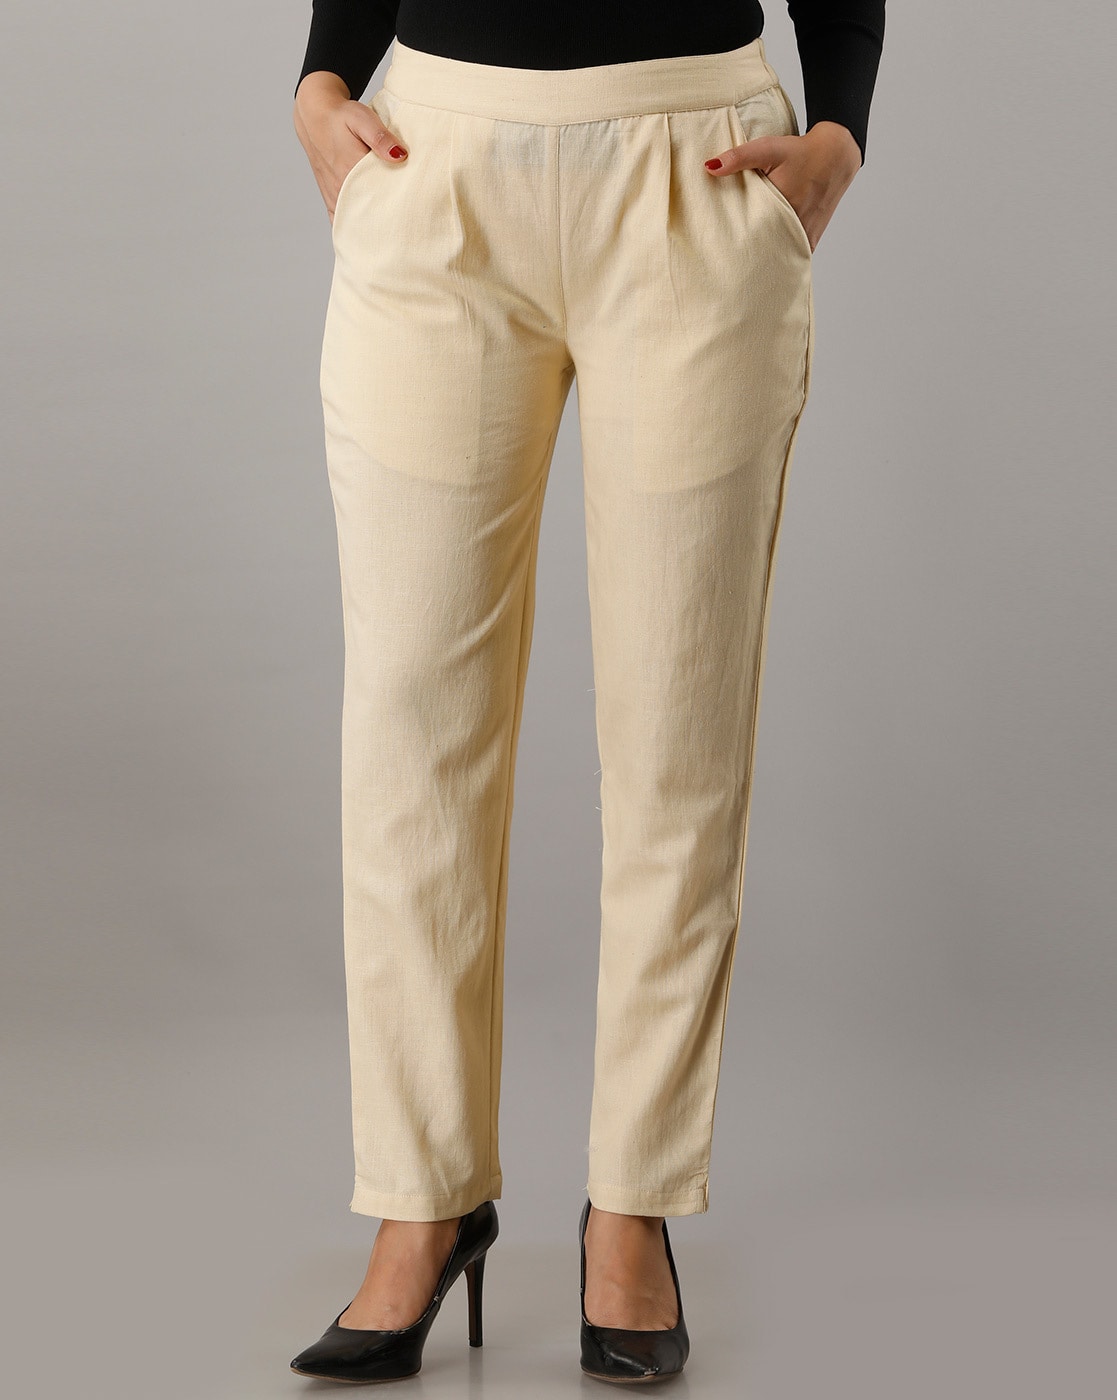 Day-To-Day Pants Cream | Djerf Avenue